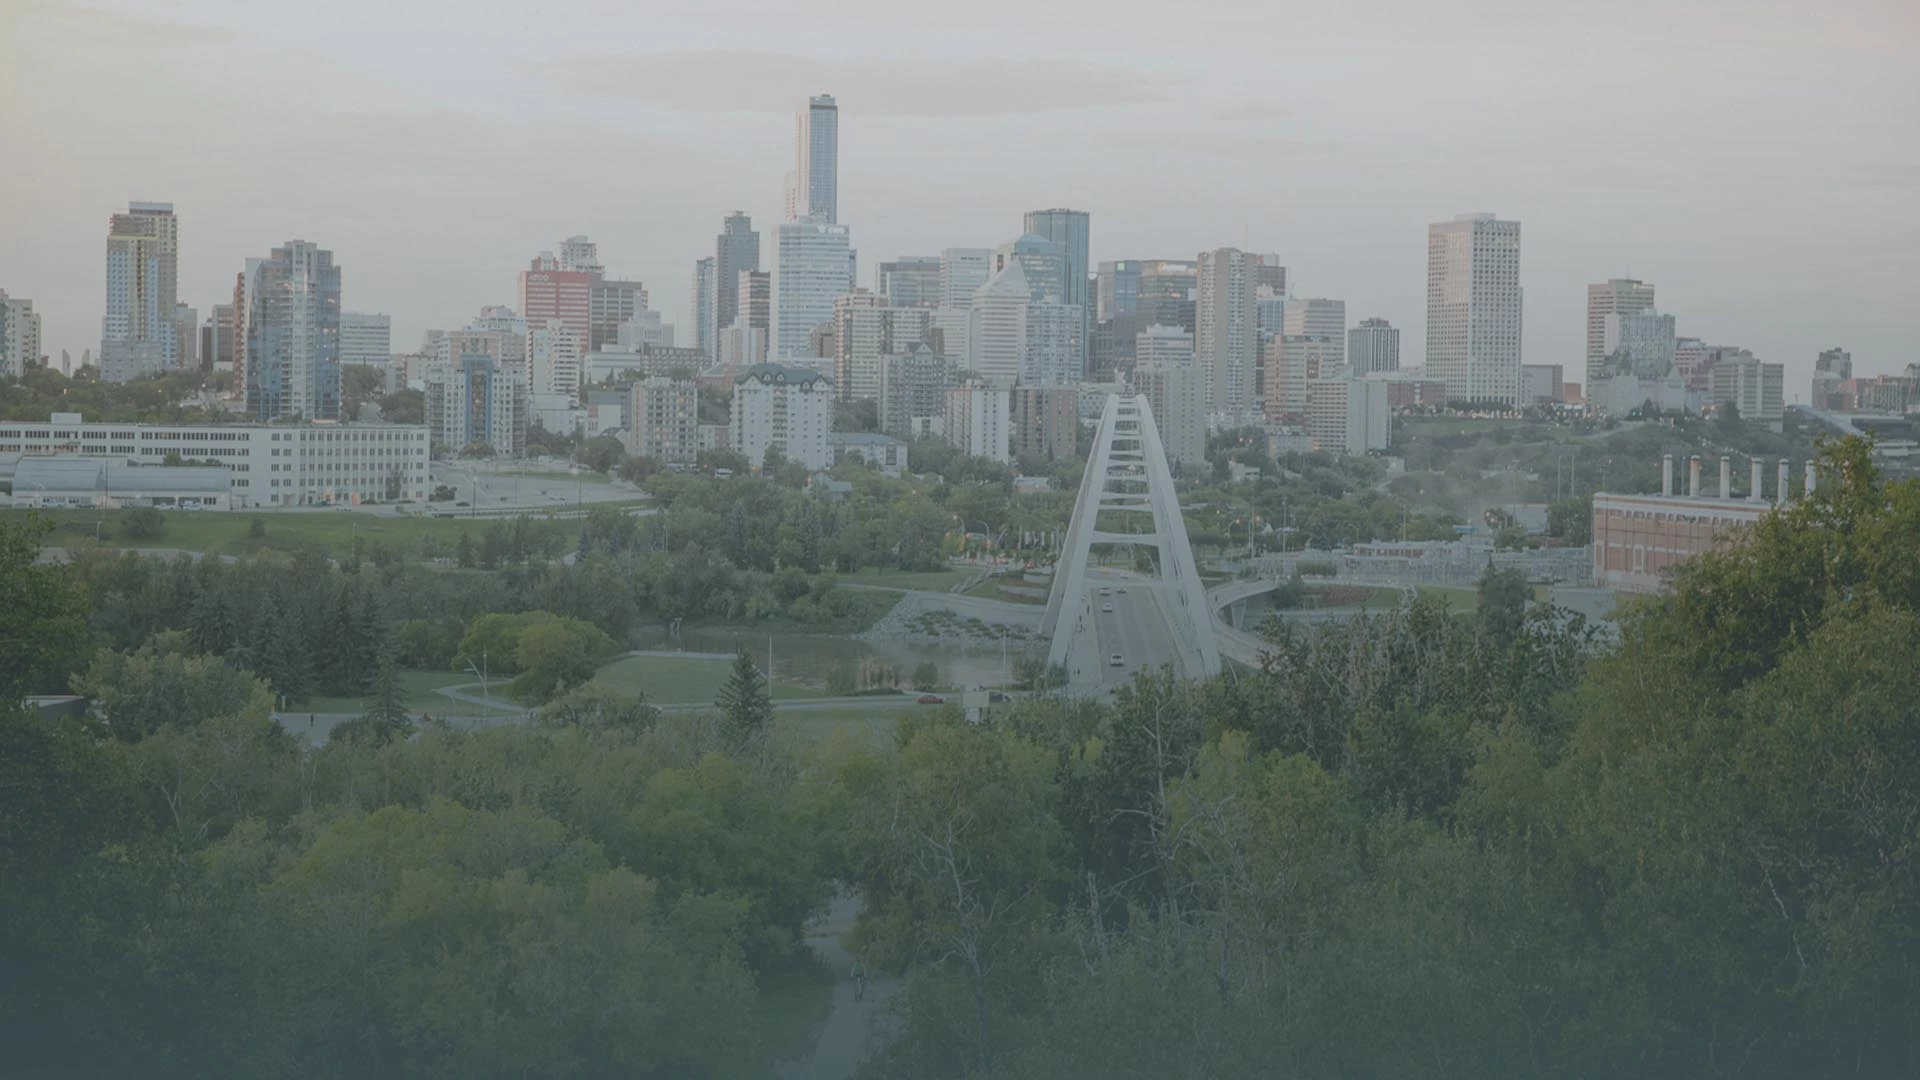 edmonton skyline, PEP supports and educates families dealing with the effects of substance use and addiction in loved ones.